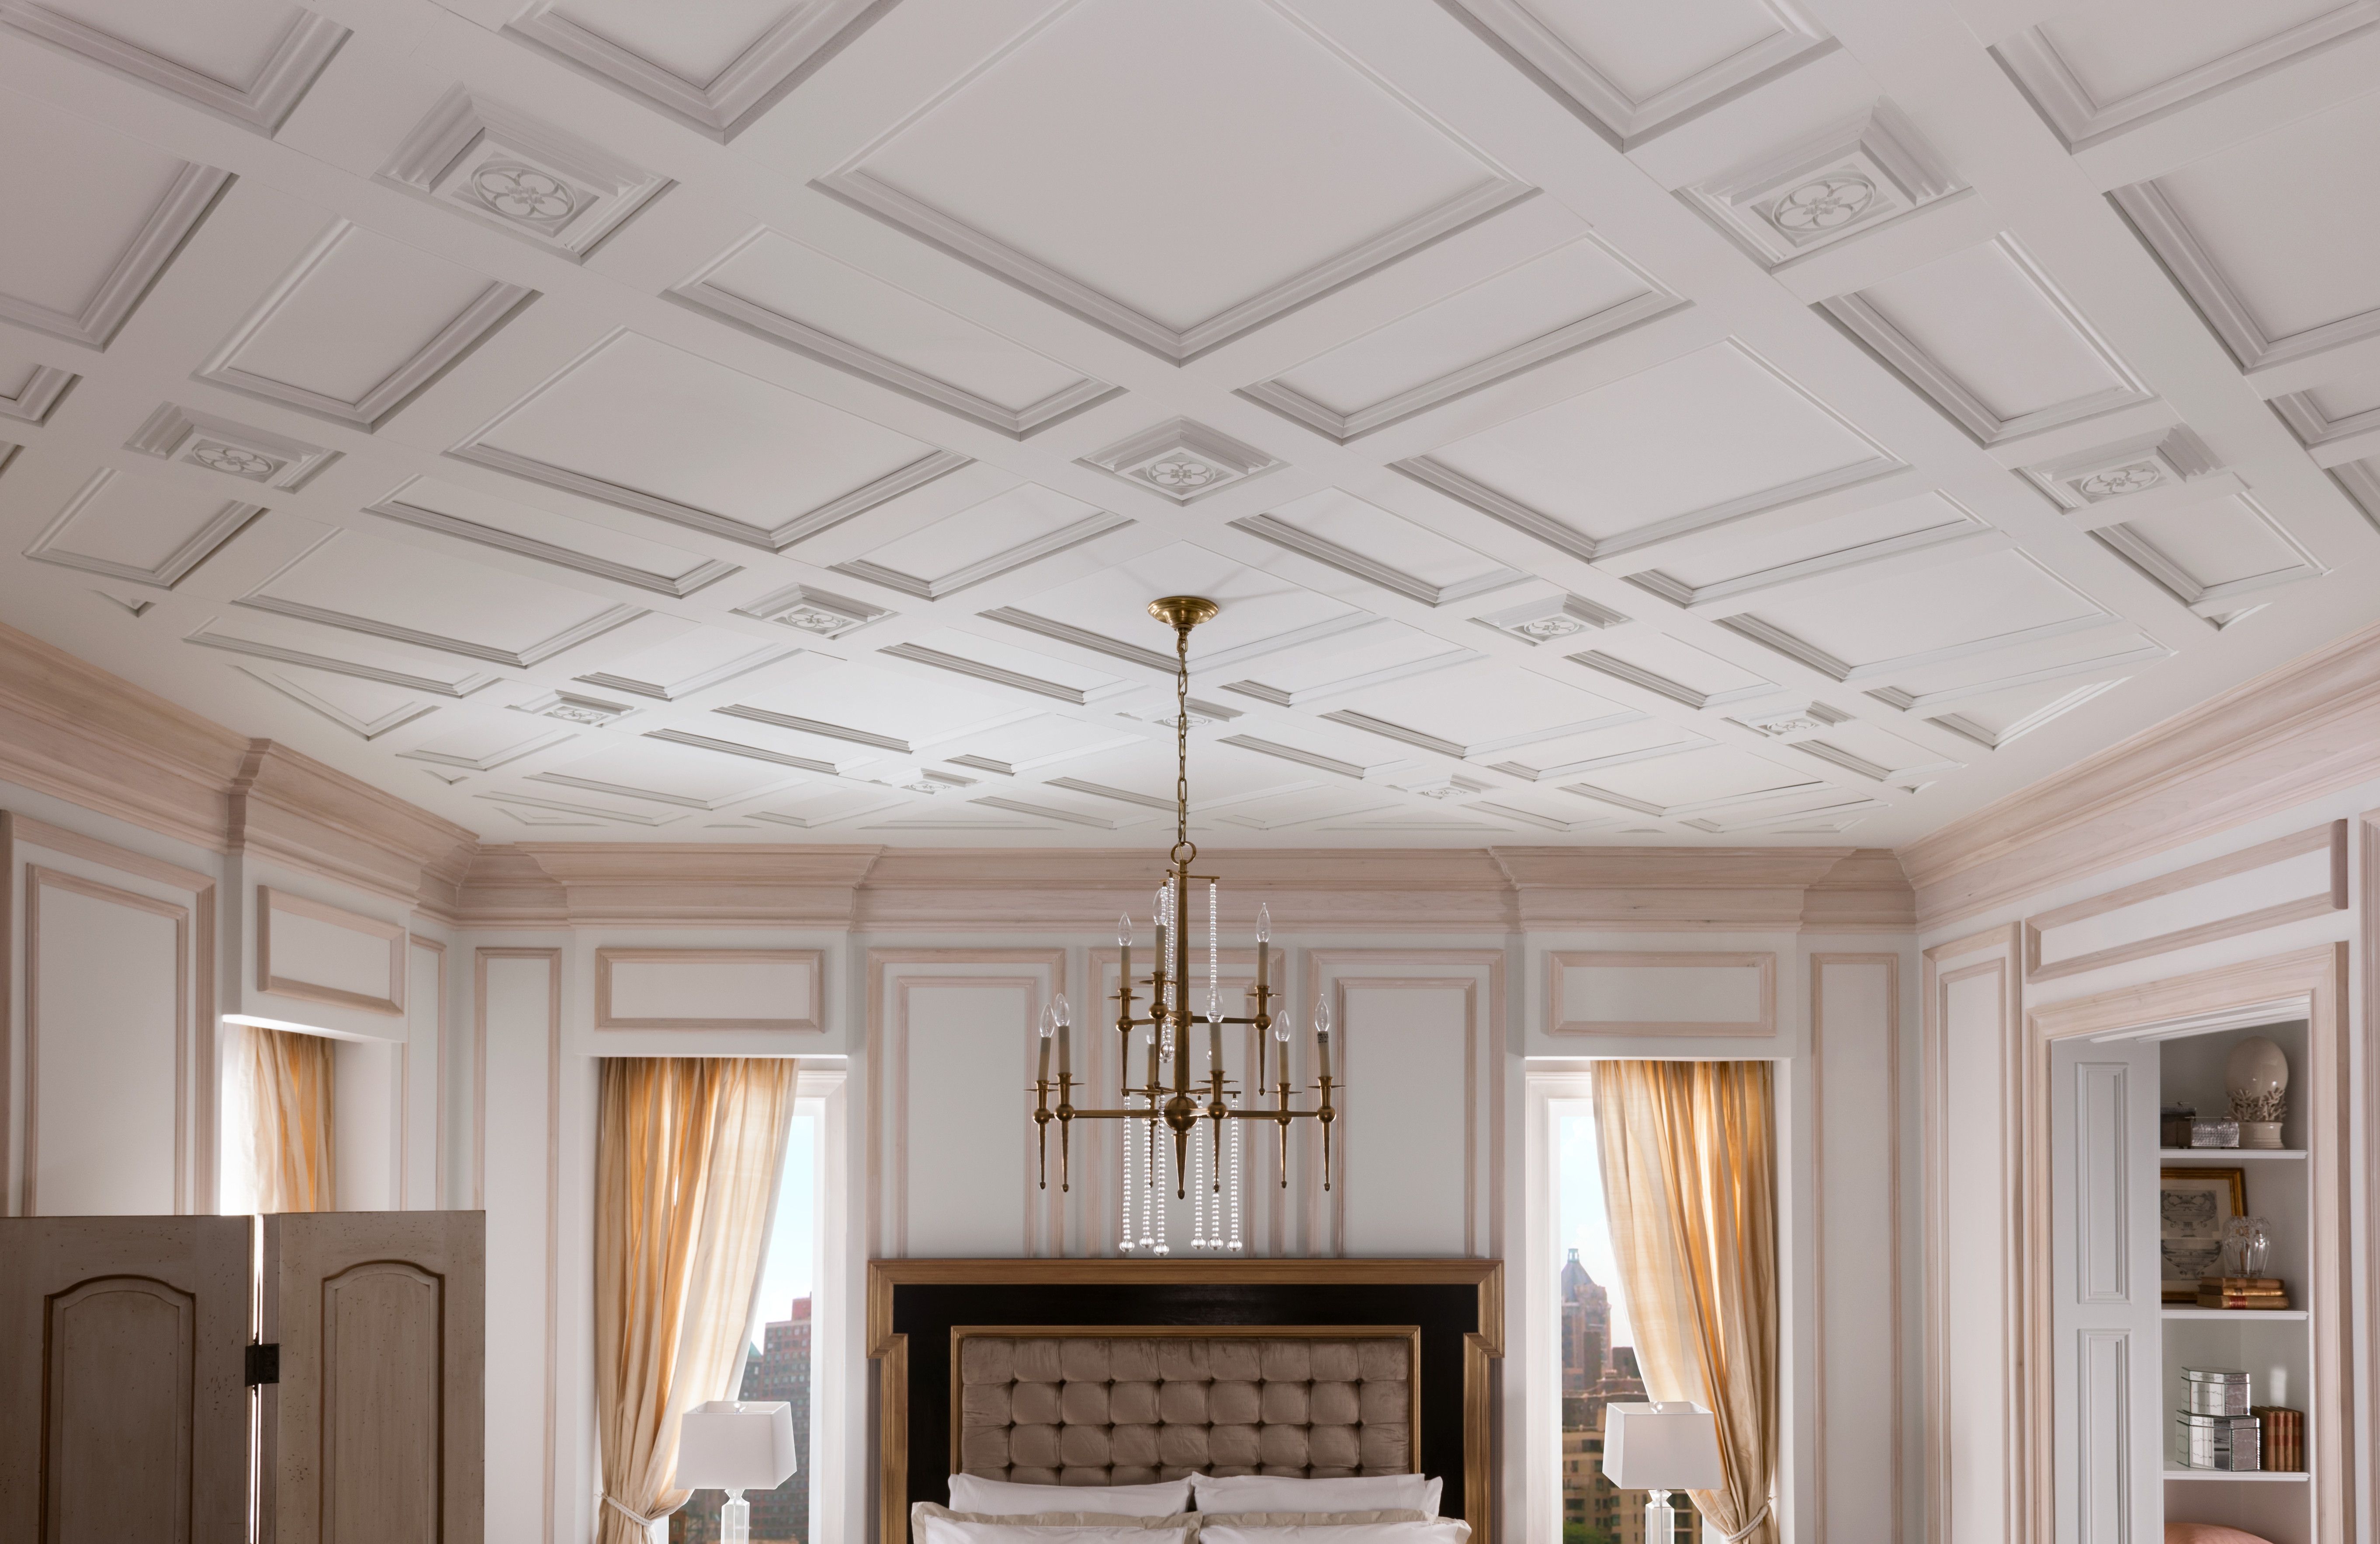 Grandeur And Grace: The Impact Of French Ceilings And Moldings